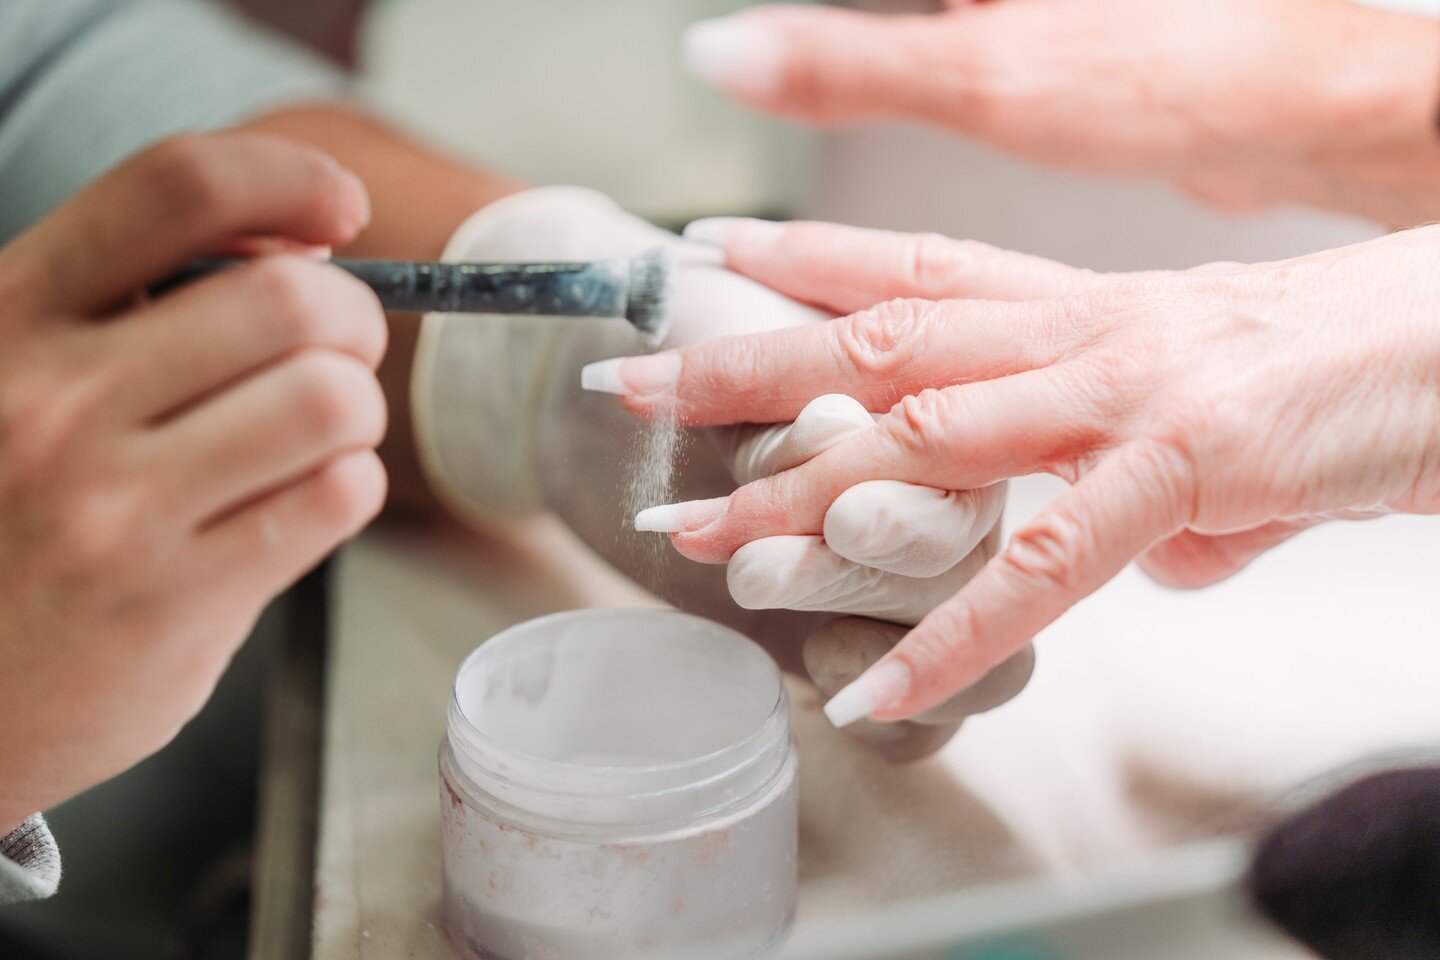 Behind every manicure, there's a lot of hard work and a little bit of magic ✨

#nails #nailsalon #perfectnailsbythu #perfectnailsvt #styledwithkindness #perfectnails #nailsalonfamily #salonfamily #manicure #nailtech #nailtechnician #nailtechappreciat